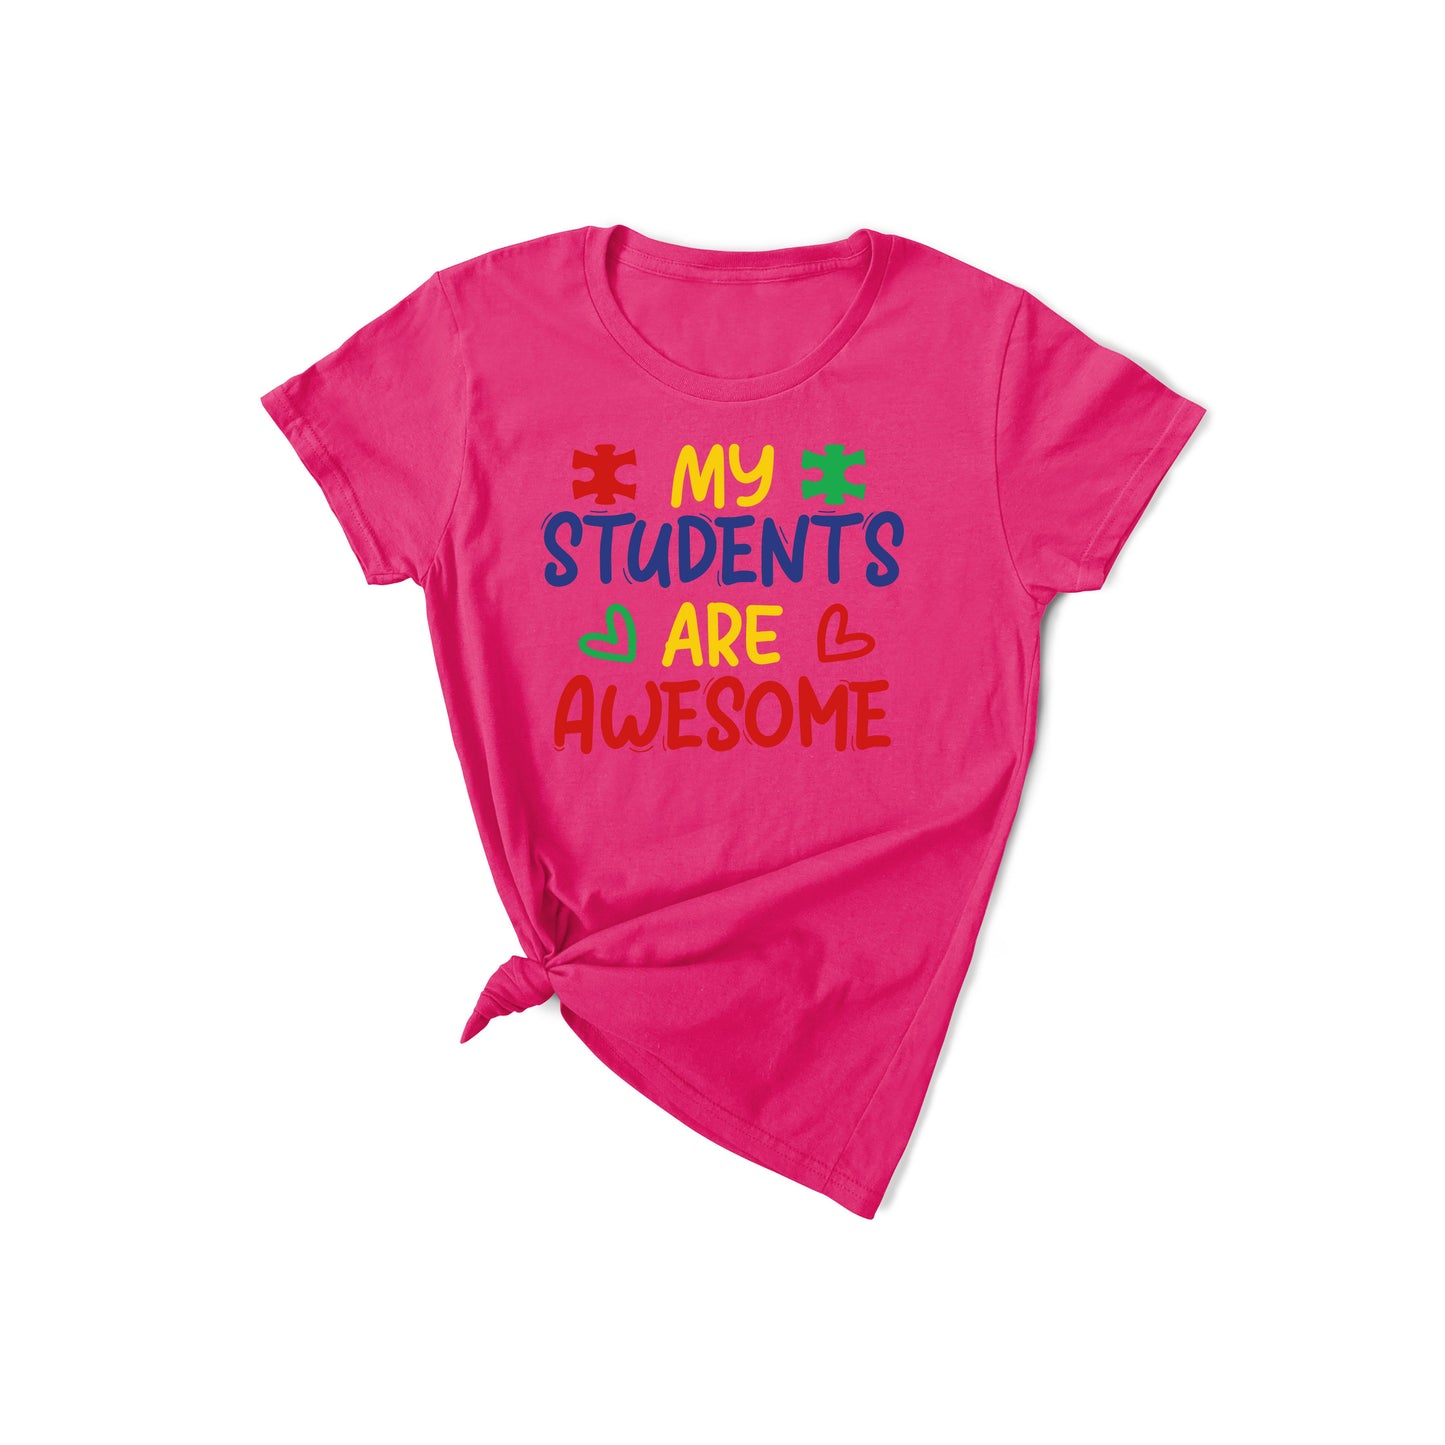 My Students are Awesome - Autism T-Shirt